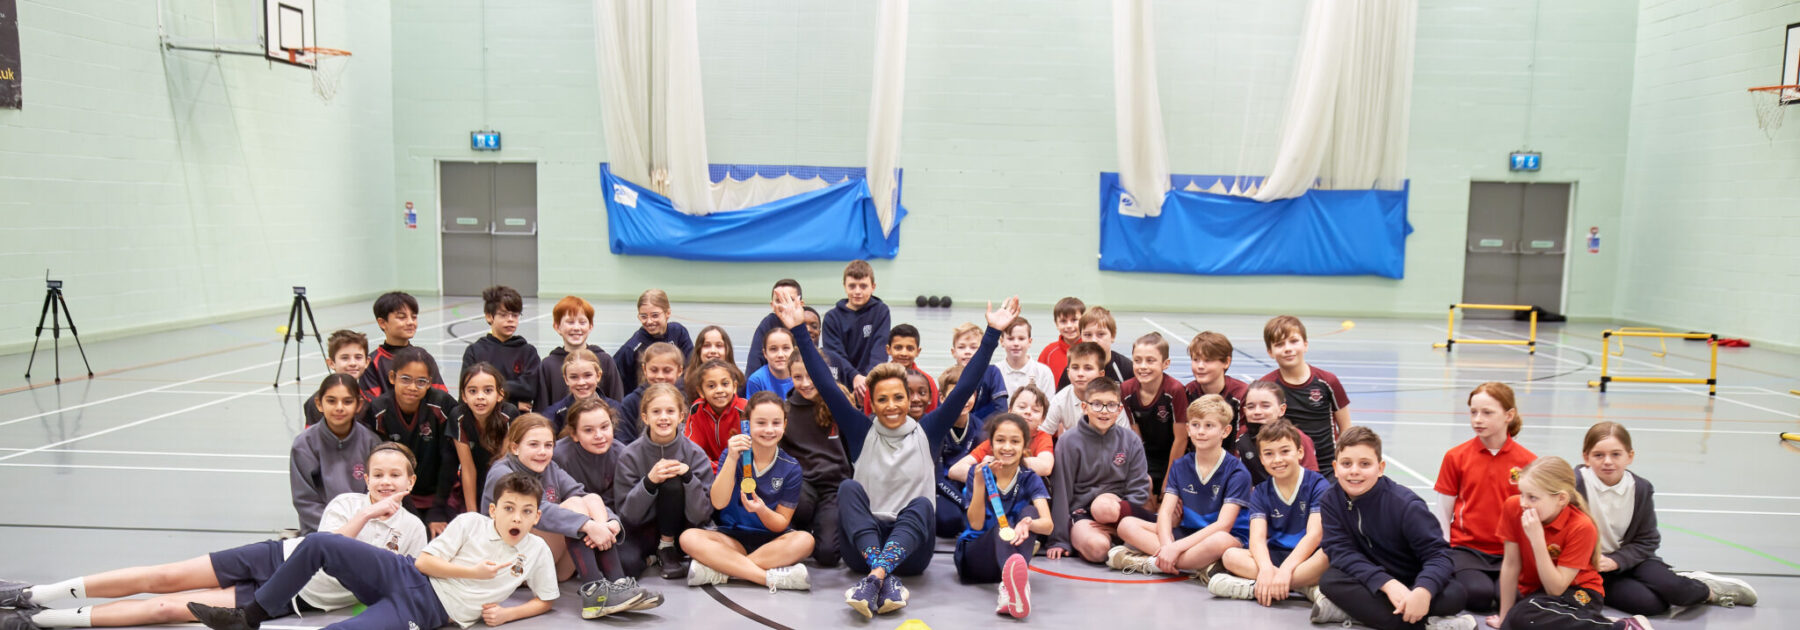 Dame Kelly Holmes Opens Supercharged Sports Centre